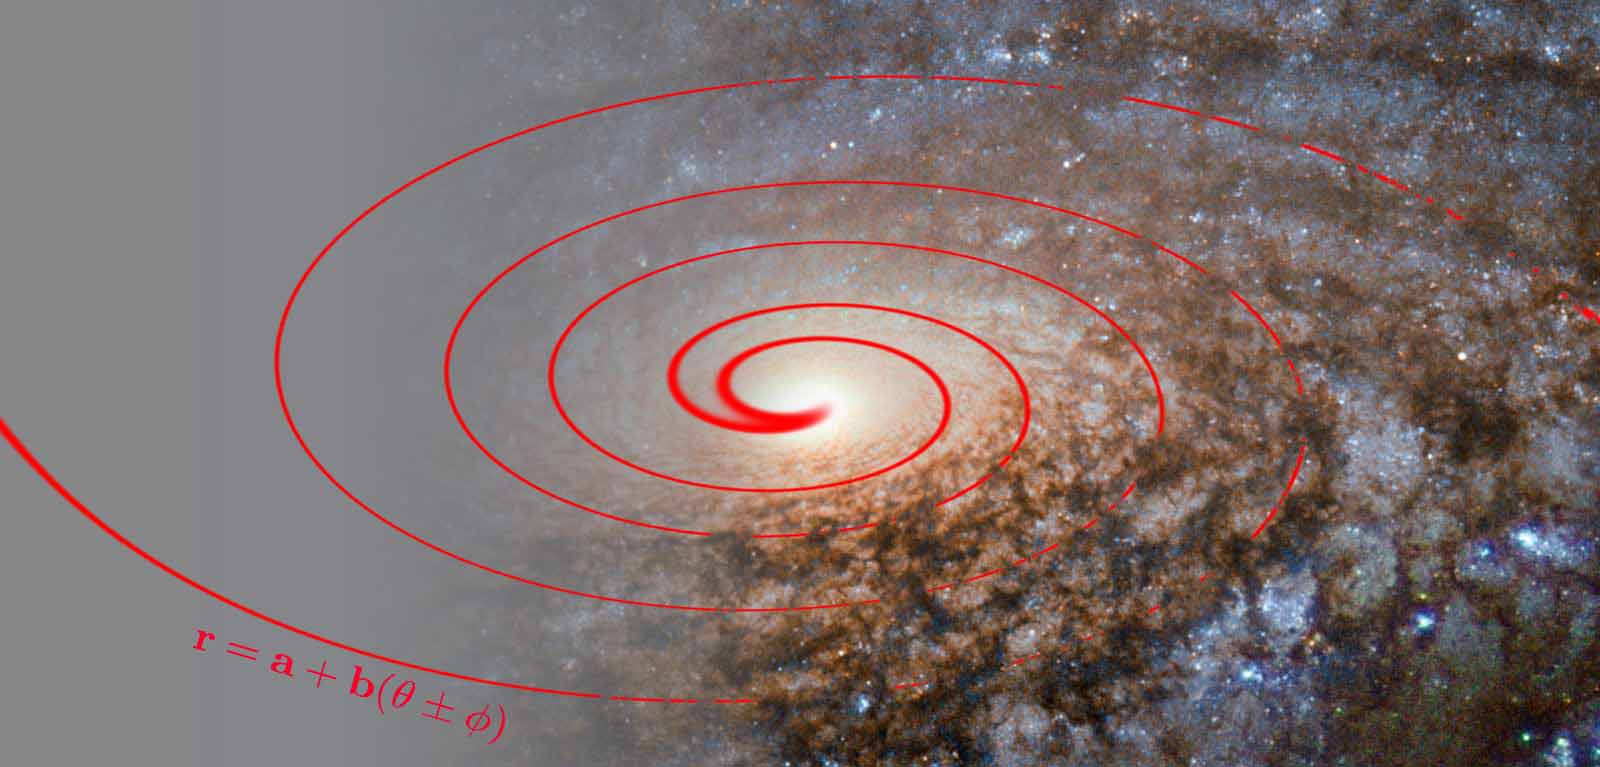 A distant galaxy with formula and scientific diagram imposed